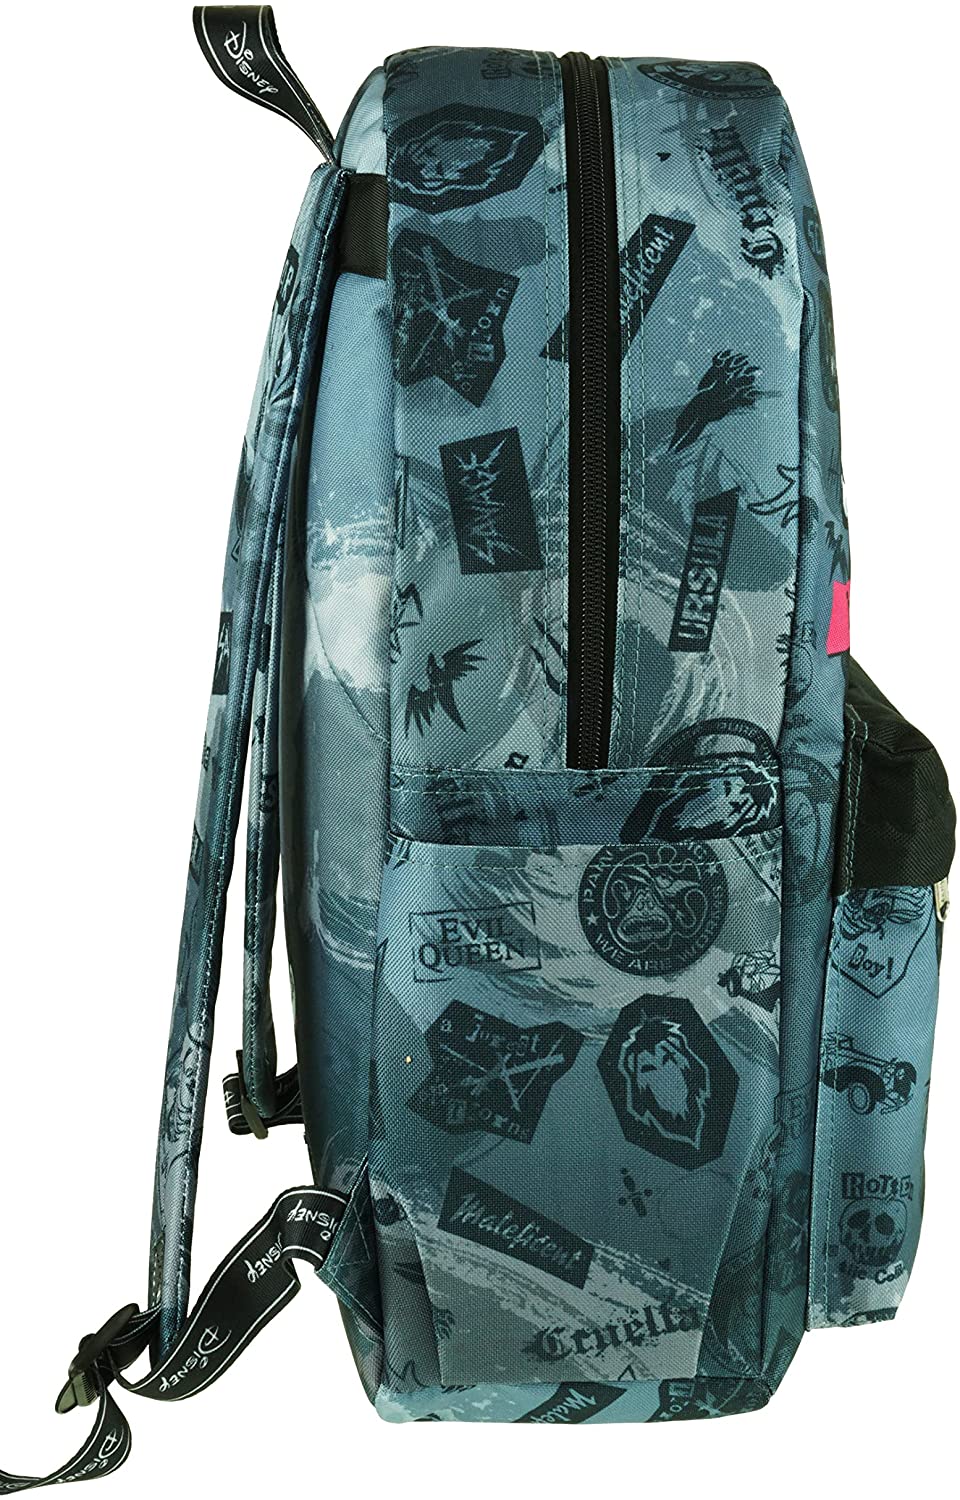 Classic Disney Villains Backpack with Laptop Compartment for School, Travel, and Work (Villains) - GTE Zone